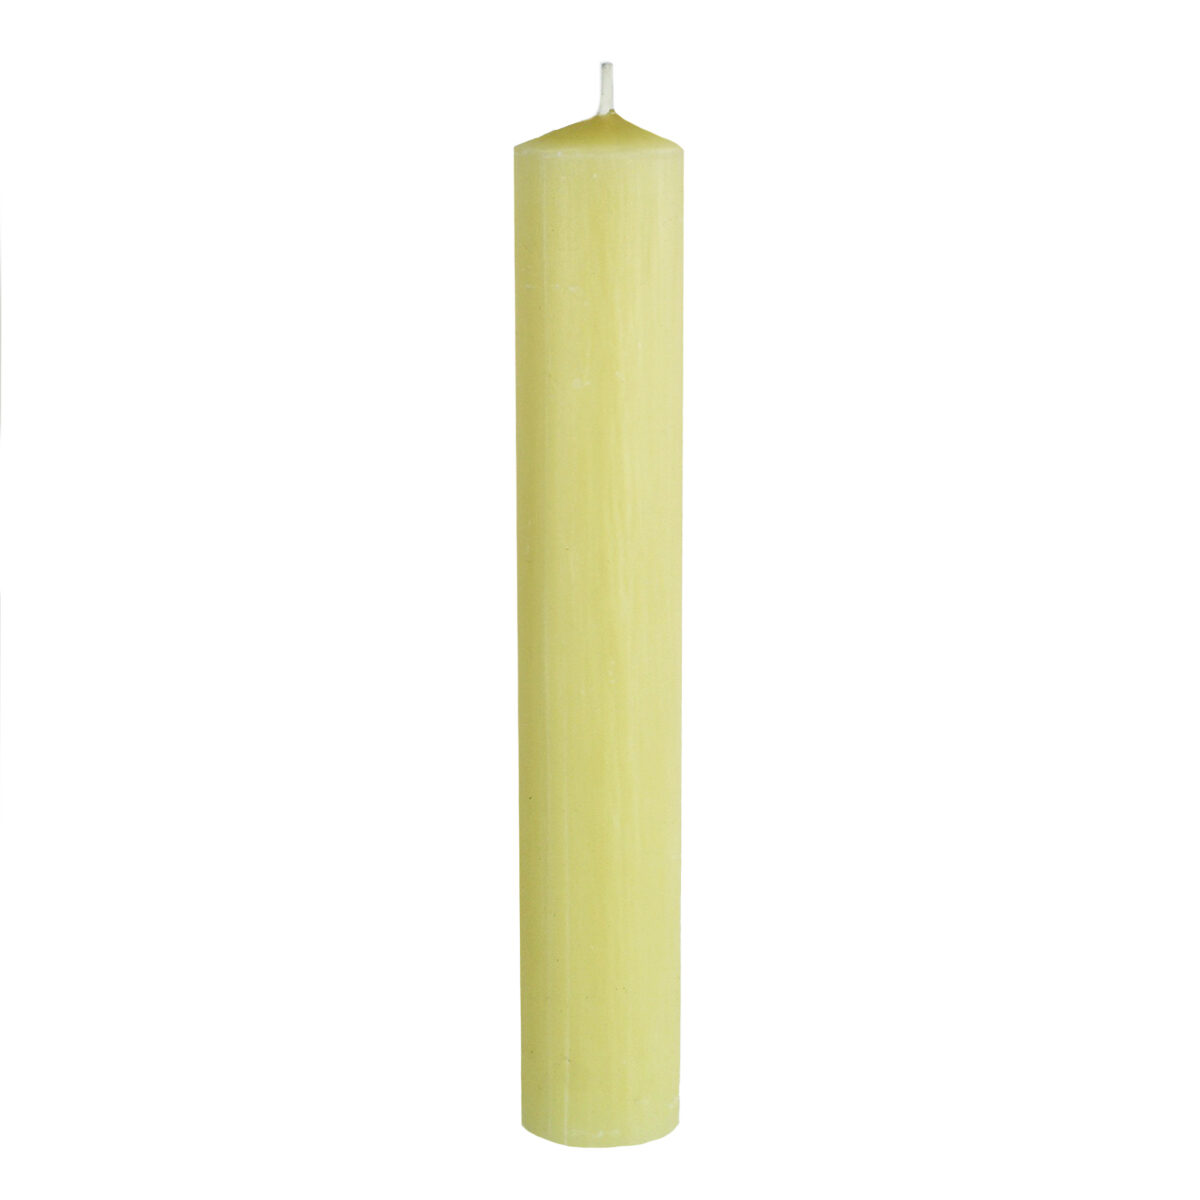 100% Beeswax 2" x 12" Groove Base Candle Stick